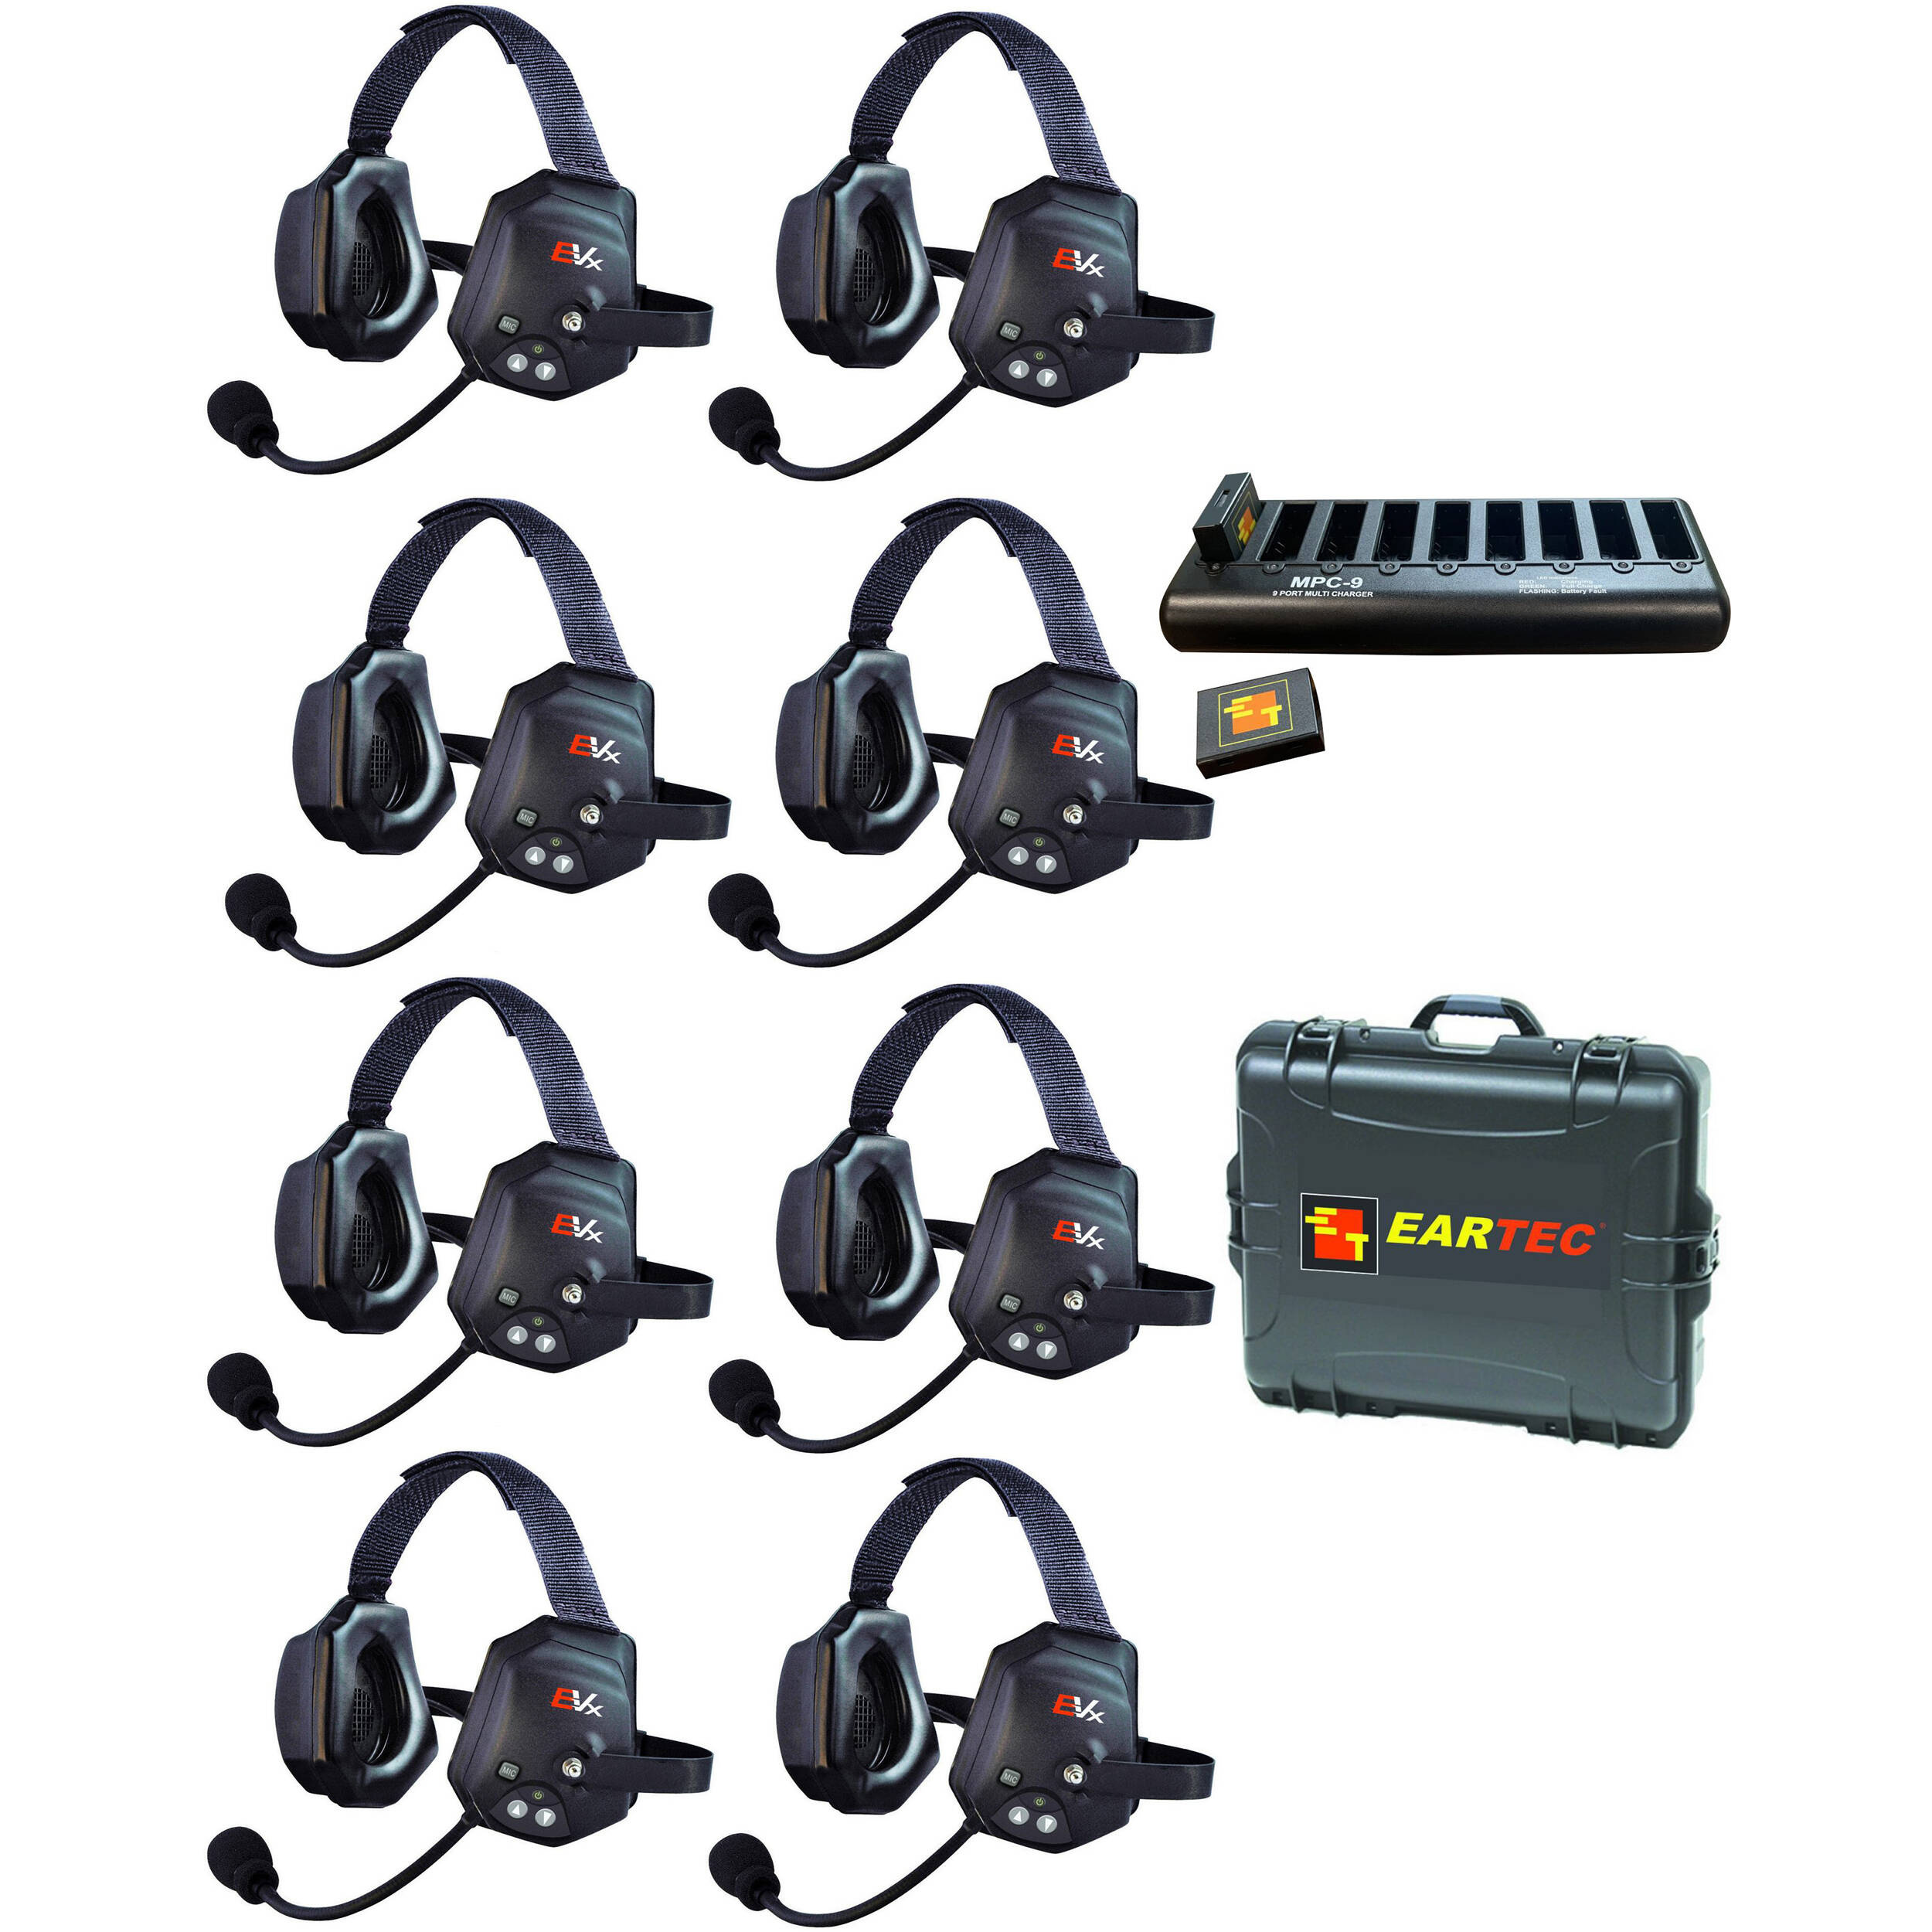 Eartec EVADE XTreme EVXT8 Industrial Full-Duplex Wireless Intercom System with 8 Dual-Ear Headsets